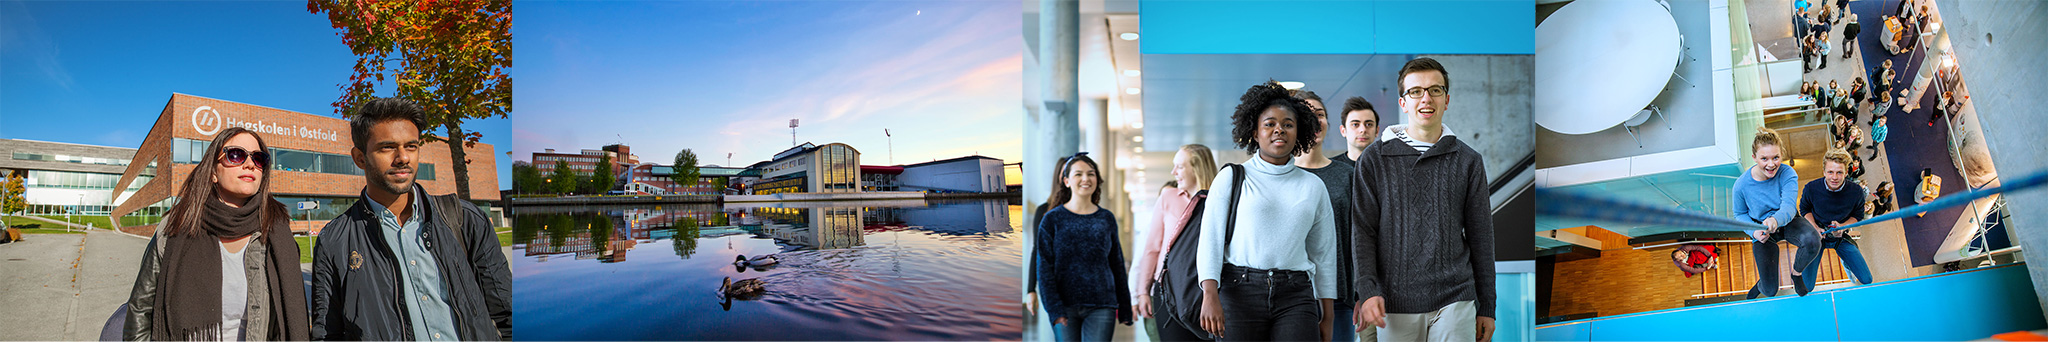 Images from the Østfold University College